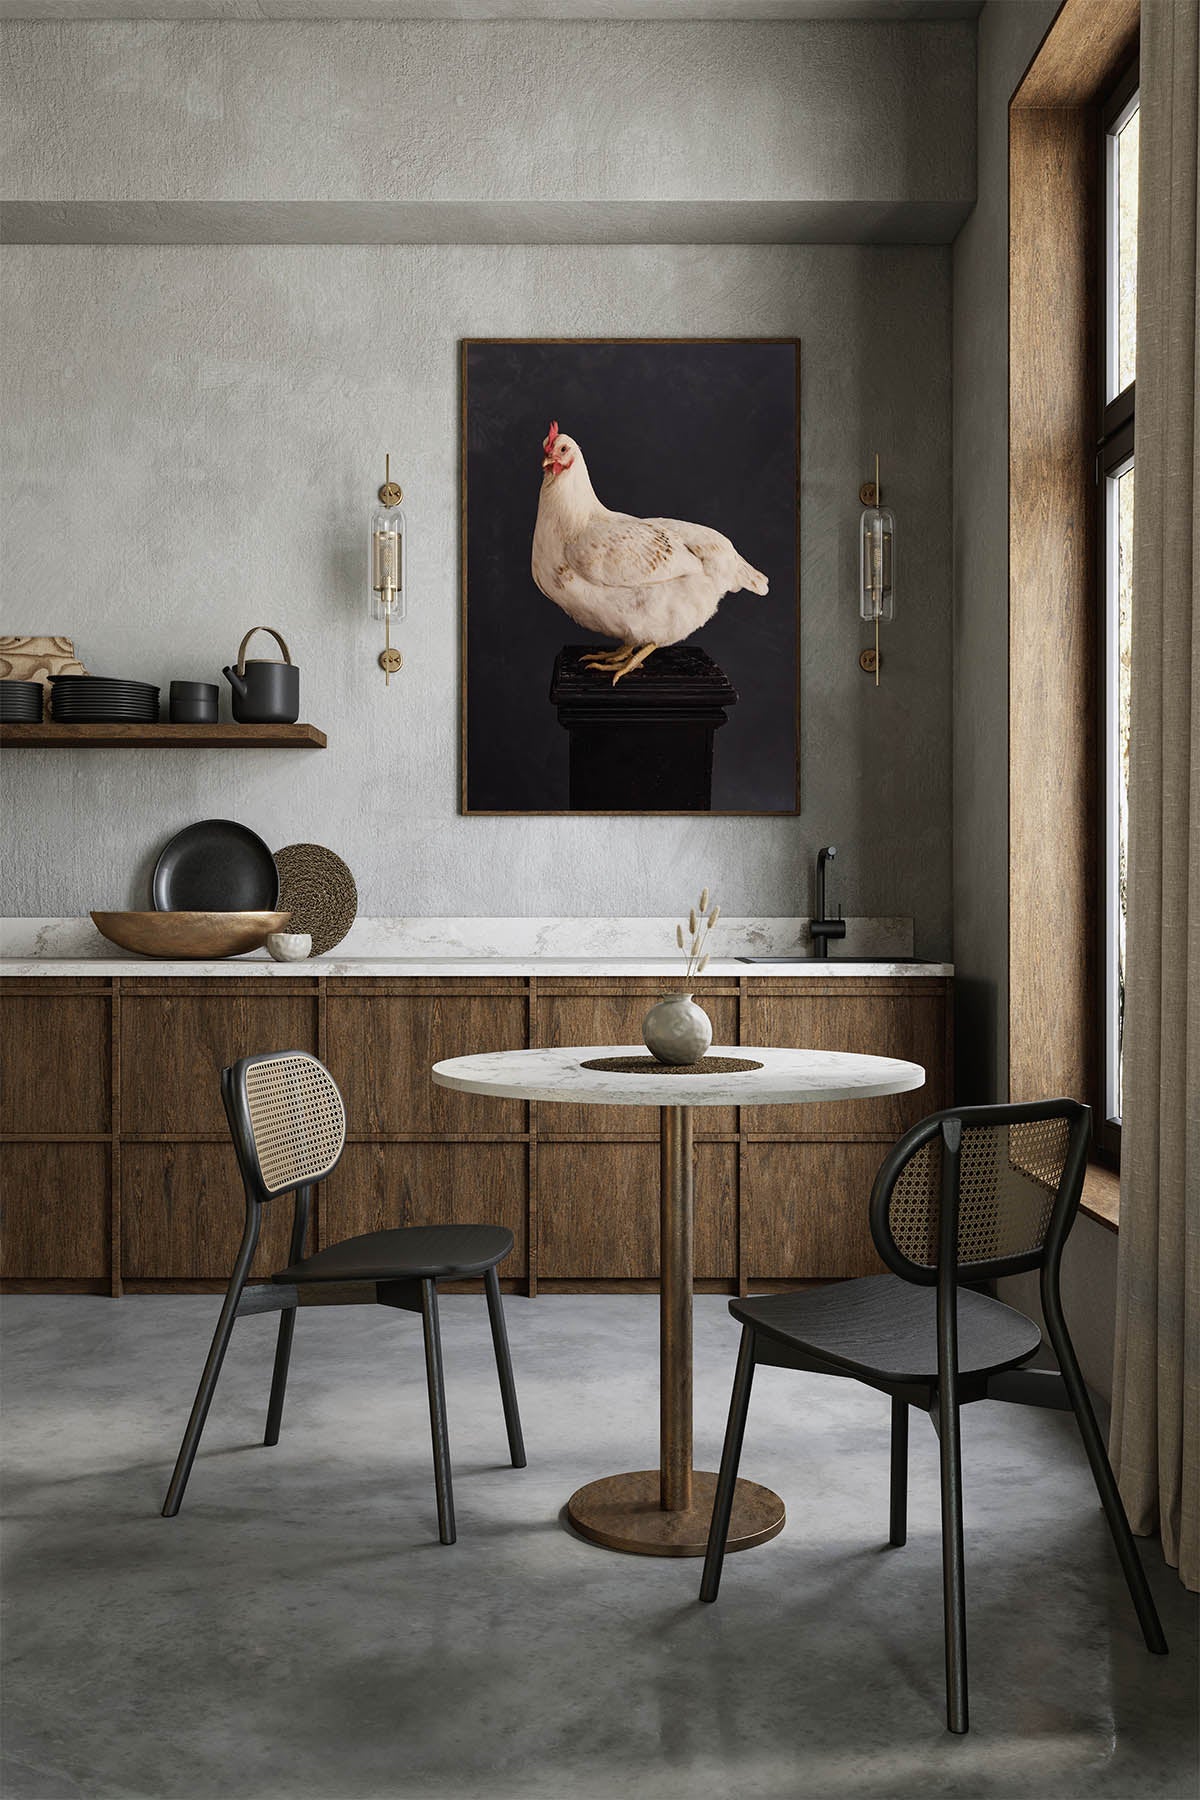 Fine Art Print Of A White Chicken Standing On A Black Plinth With A Black Background Framed On A Wall In An European Style Kitchen with Mid Century Modern Chairs and Concrete Floors.